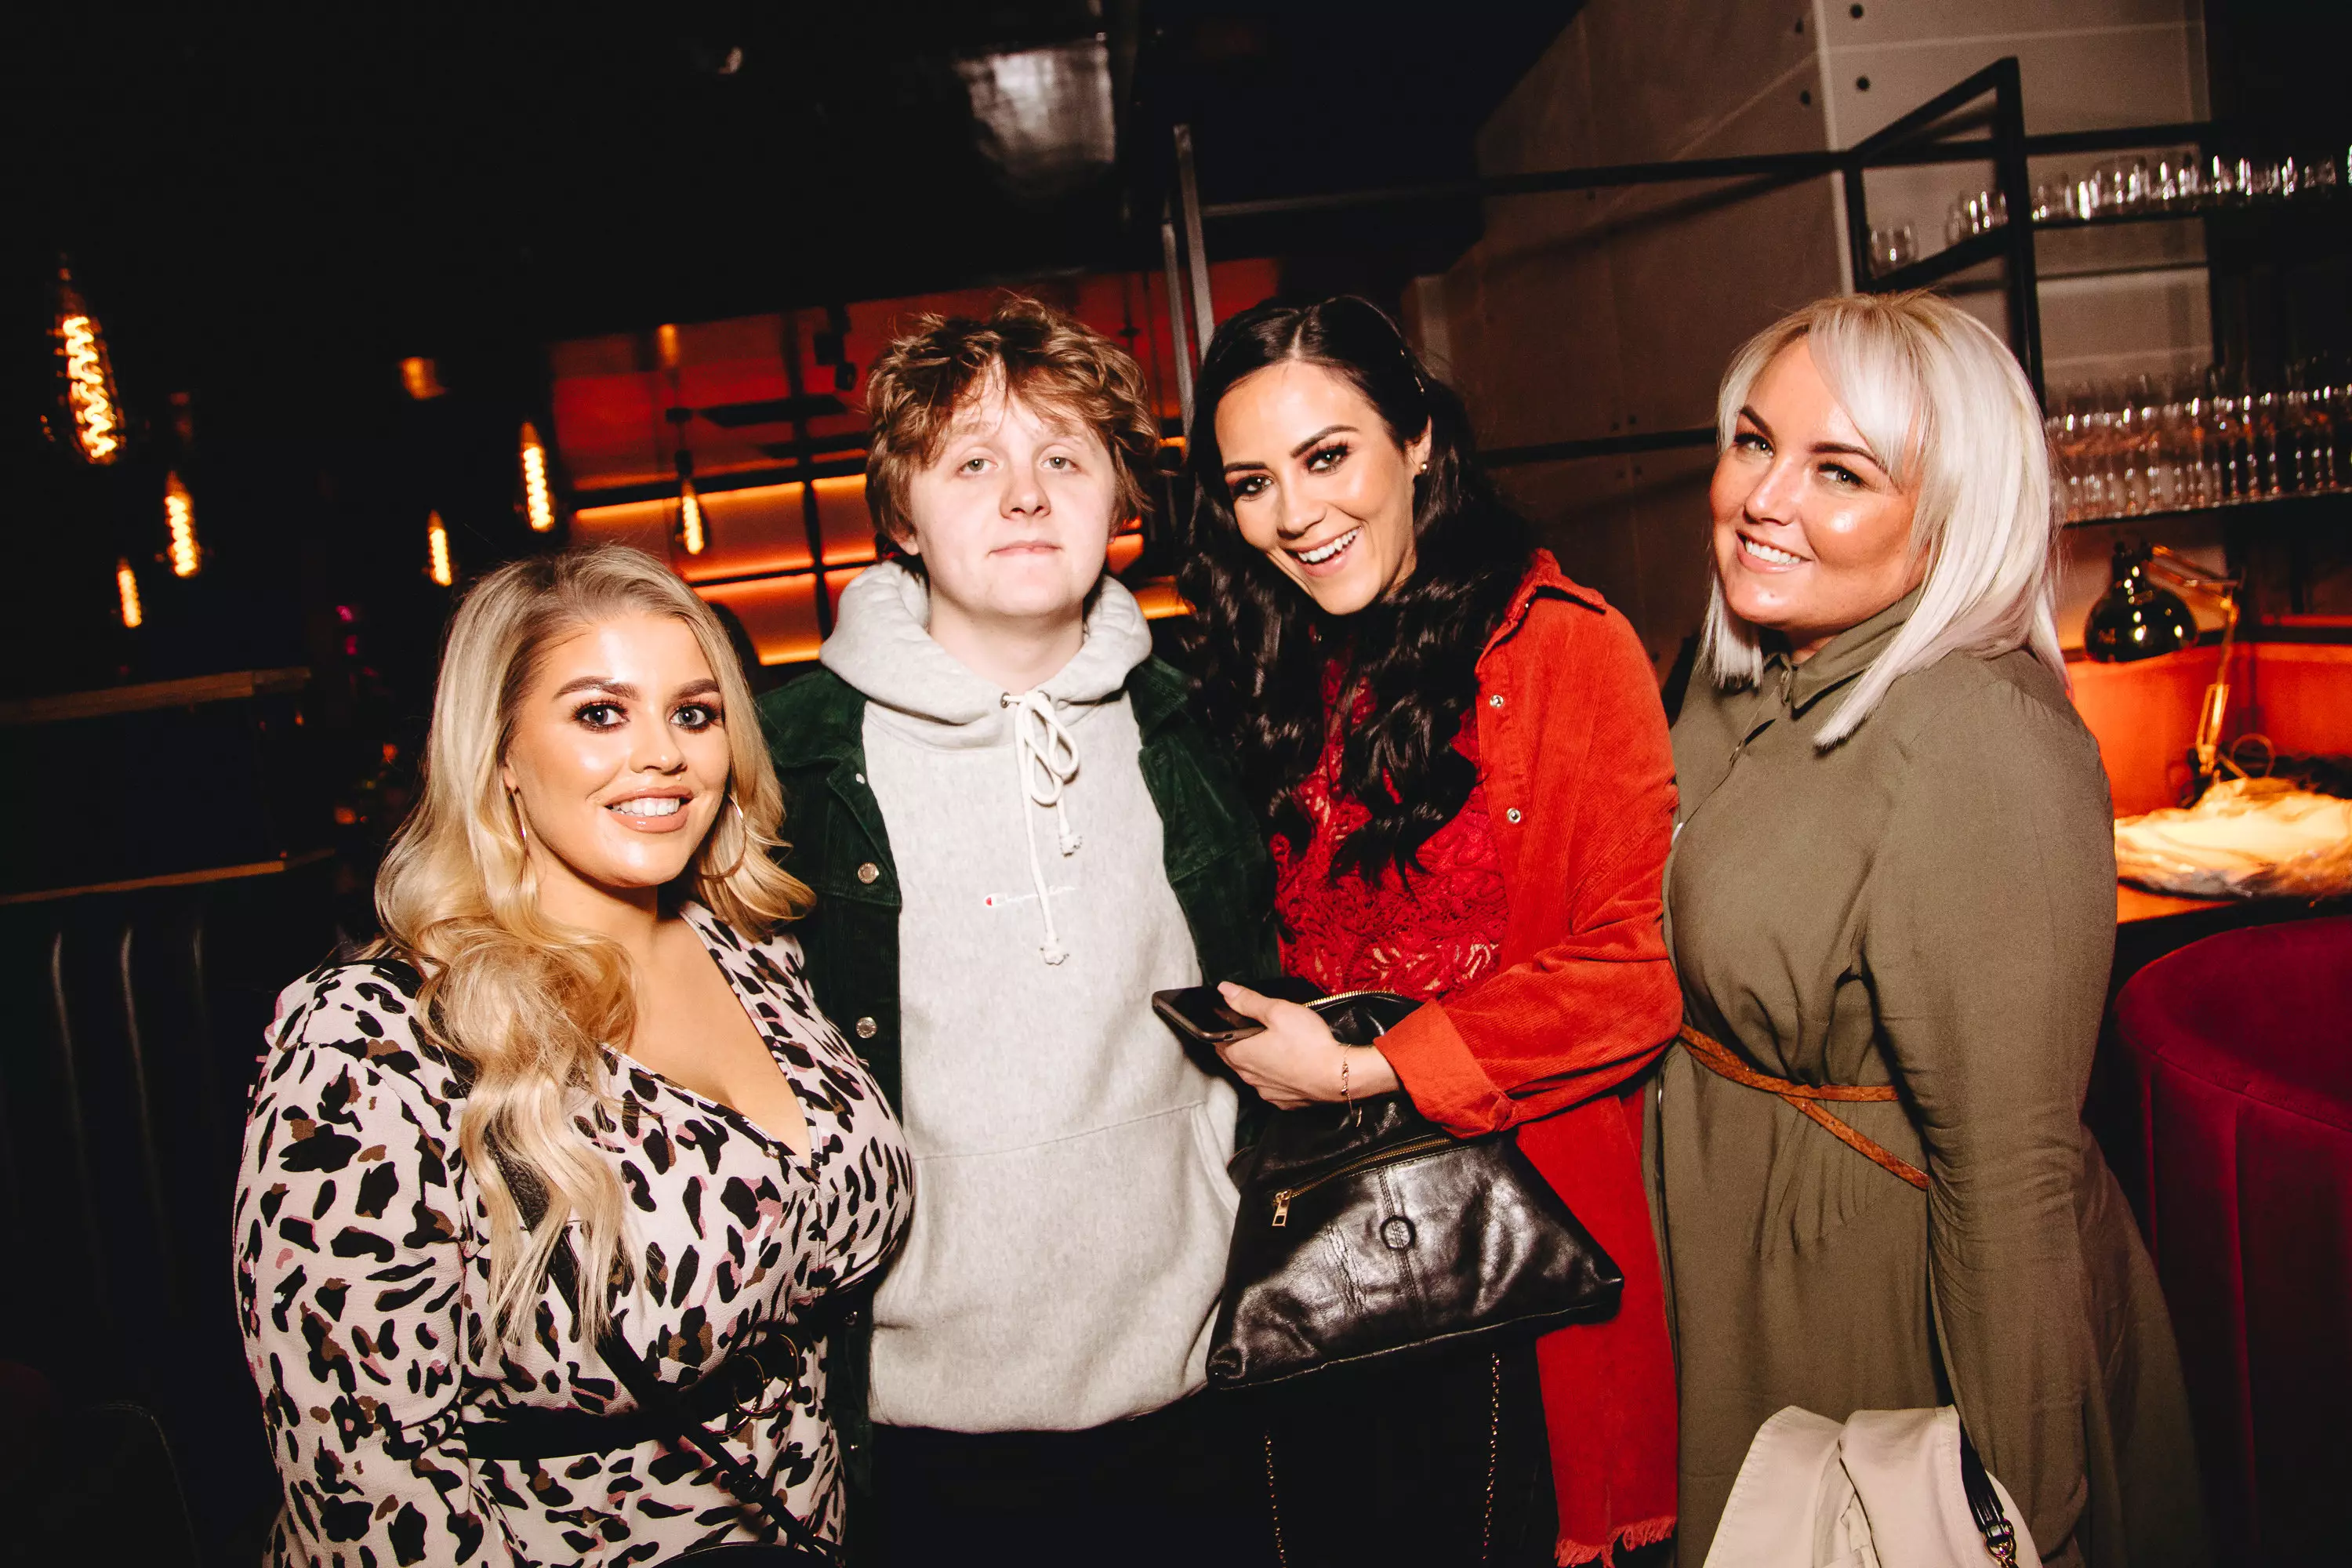 Lewis Capaldi has been providing the people with plenty of entertainment of late.